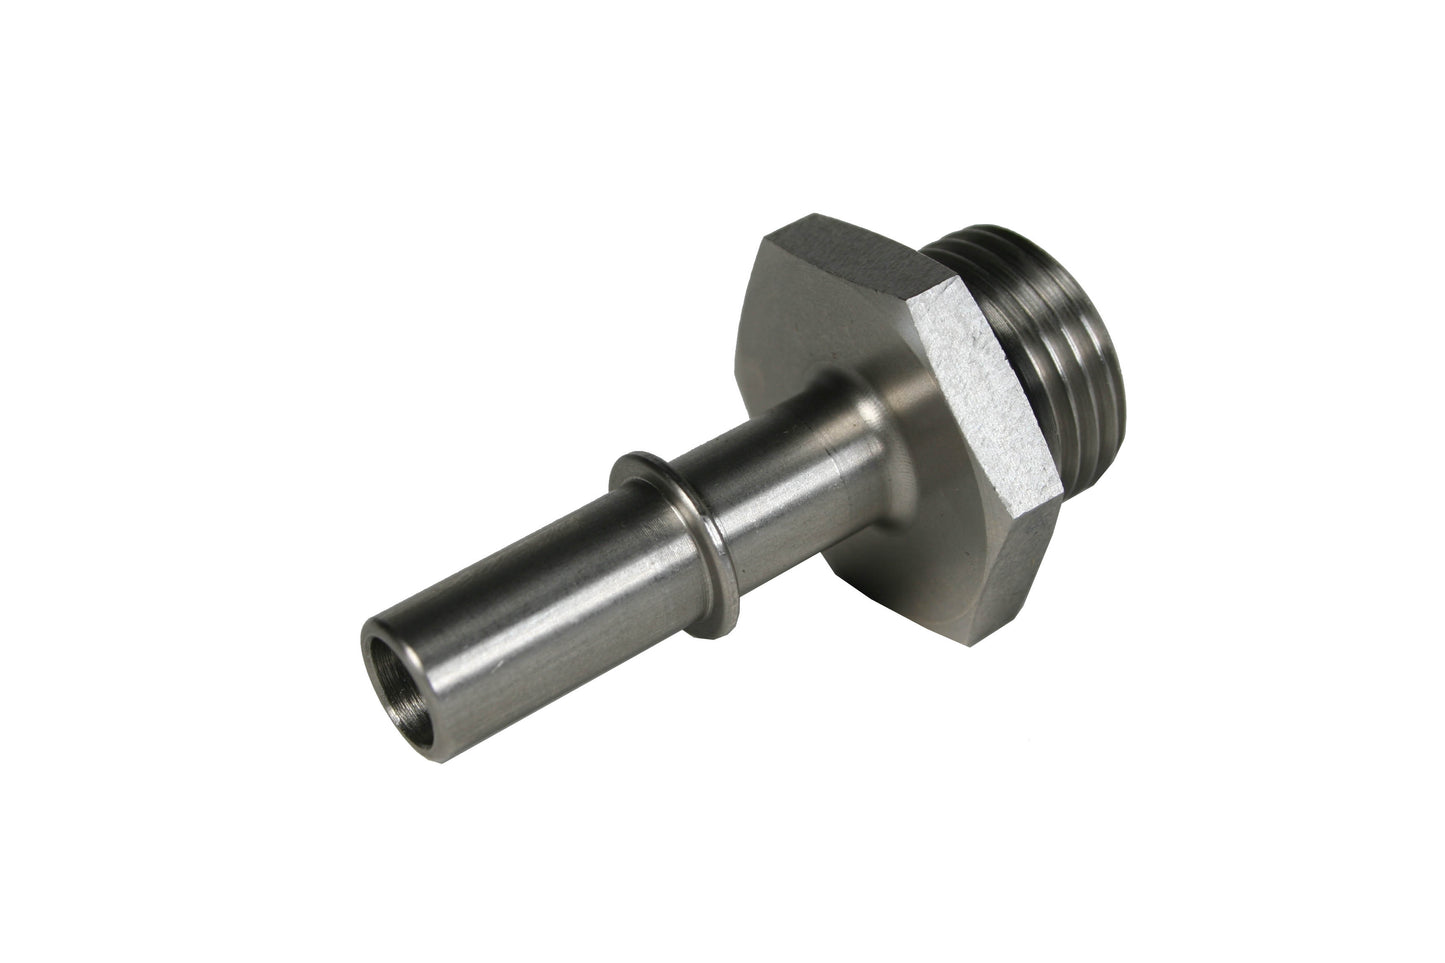 Male Quick Connect Adapters - Straight, 3/8" and 5/8"